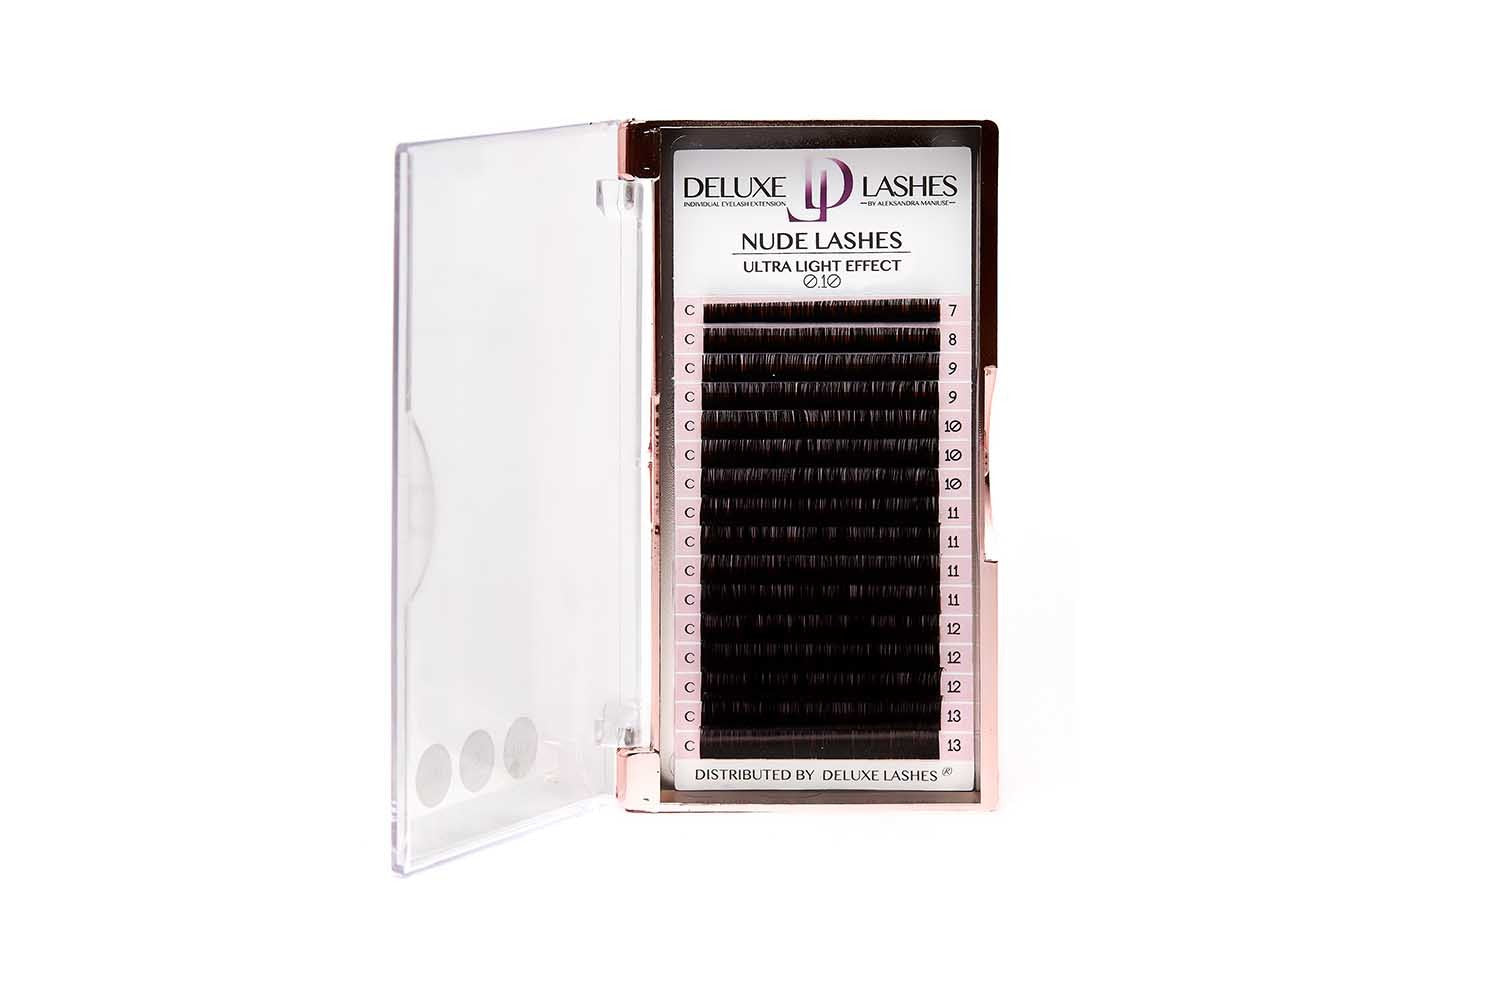 Deluxe Lashes NUDE